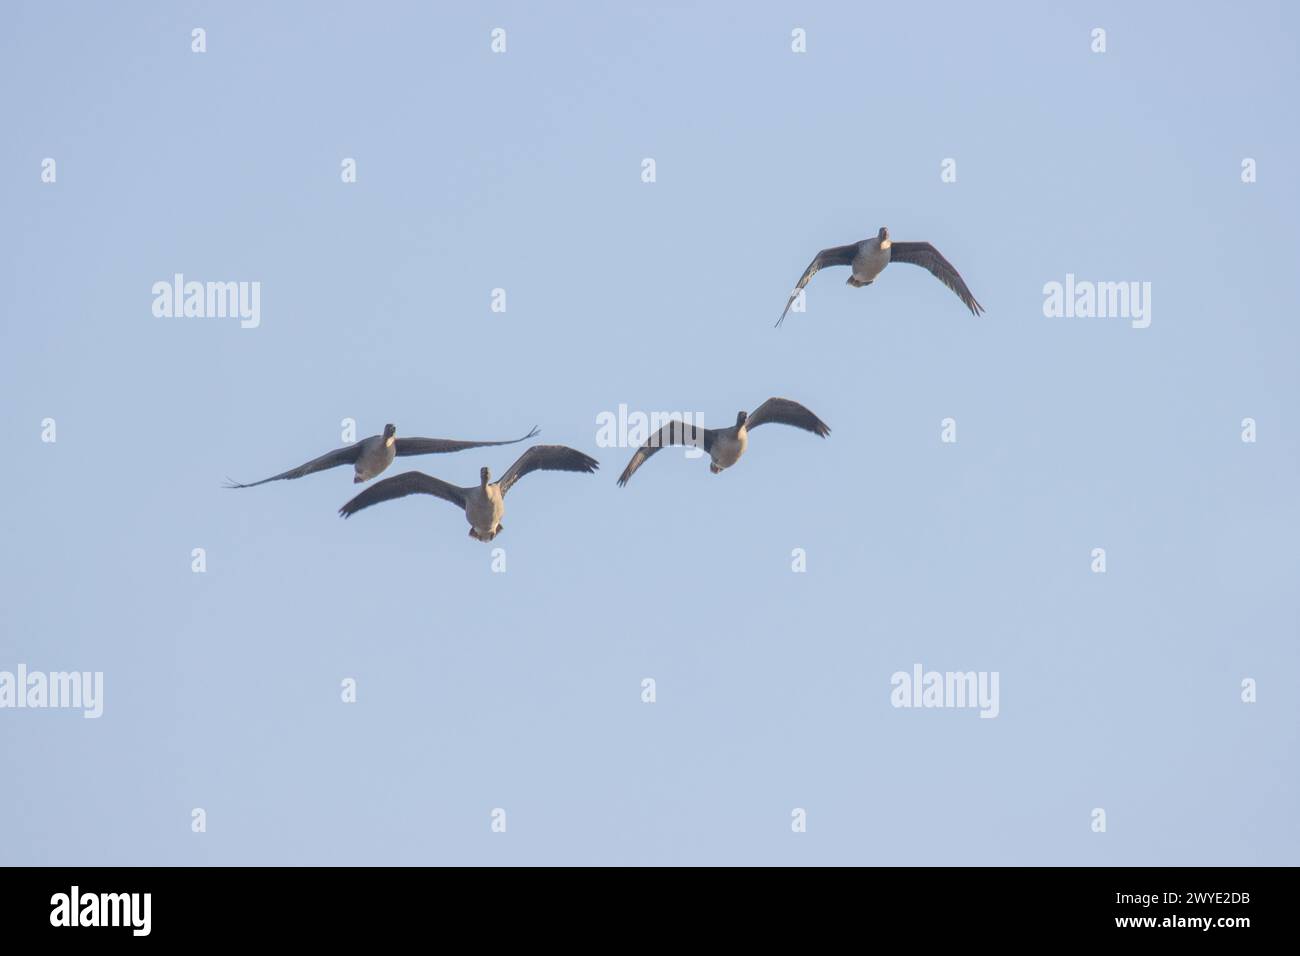 Bean goose (Anser fabalis). Flocks of migrating geese in the sky and over the forest. European migration stop-overs, Birds fly full-face, rocketing Stock Photo